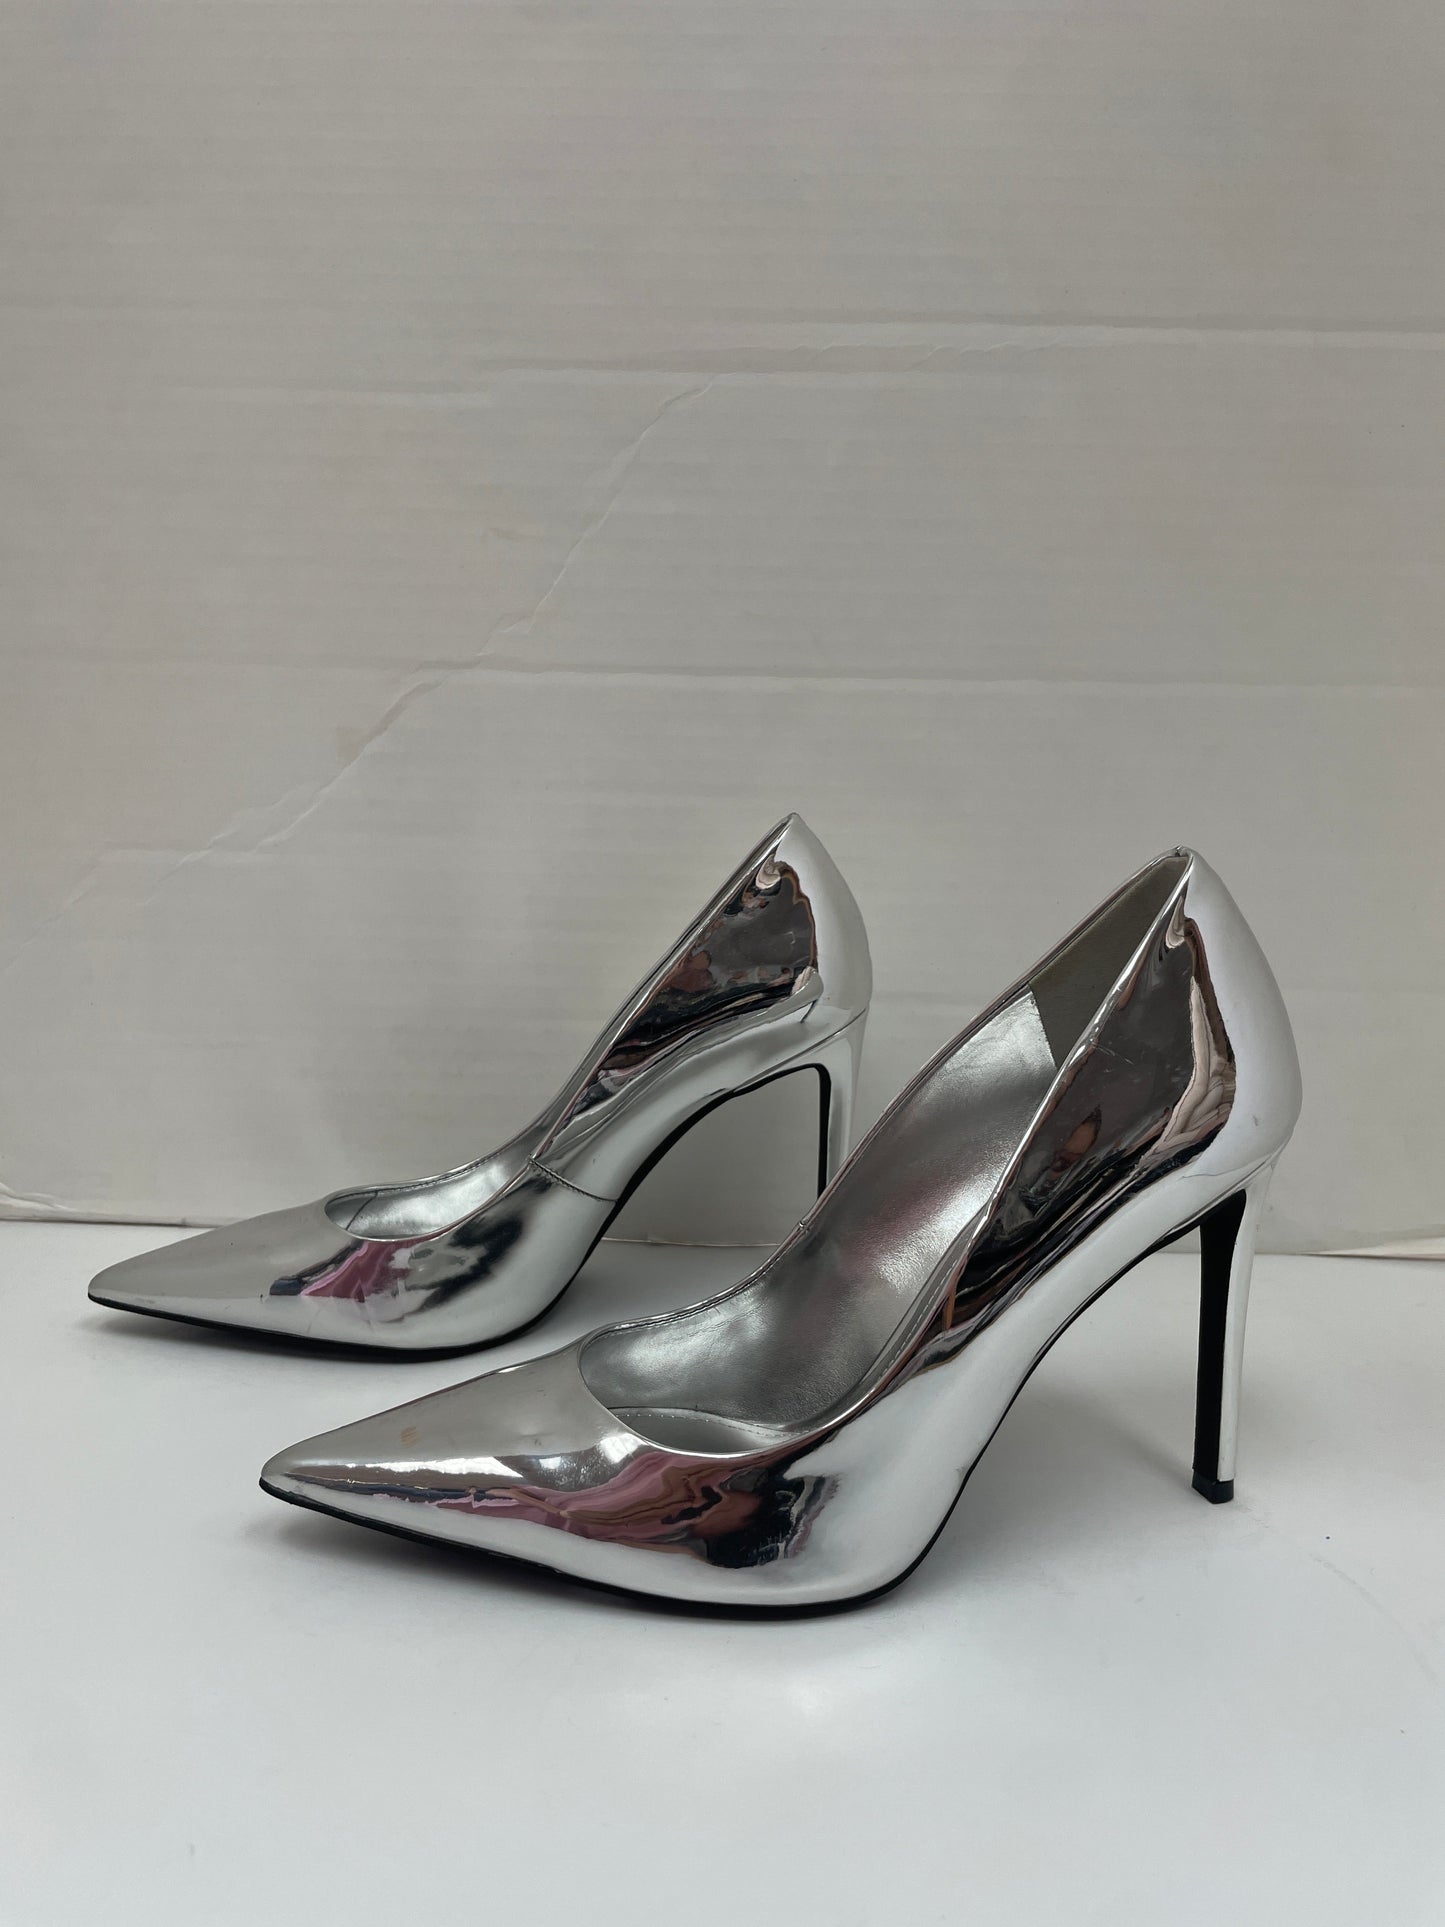 Shoes Heels Stiletto By Dkny  Size: 8